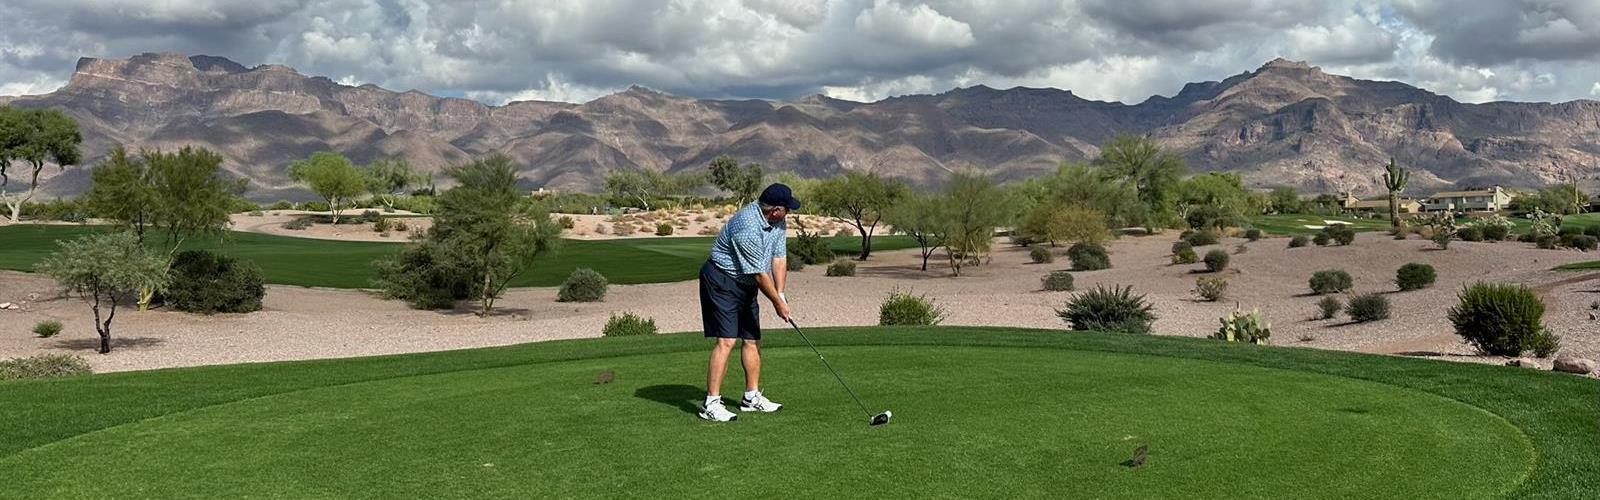 golf-in-the-fall-at-superstition-mountain